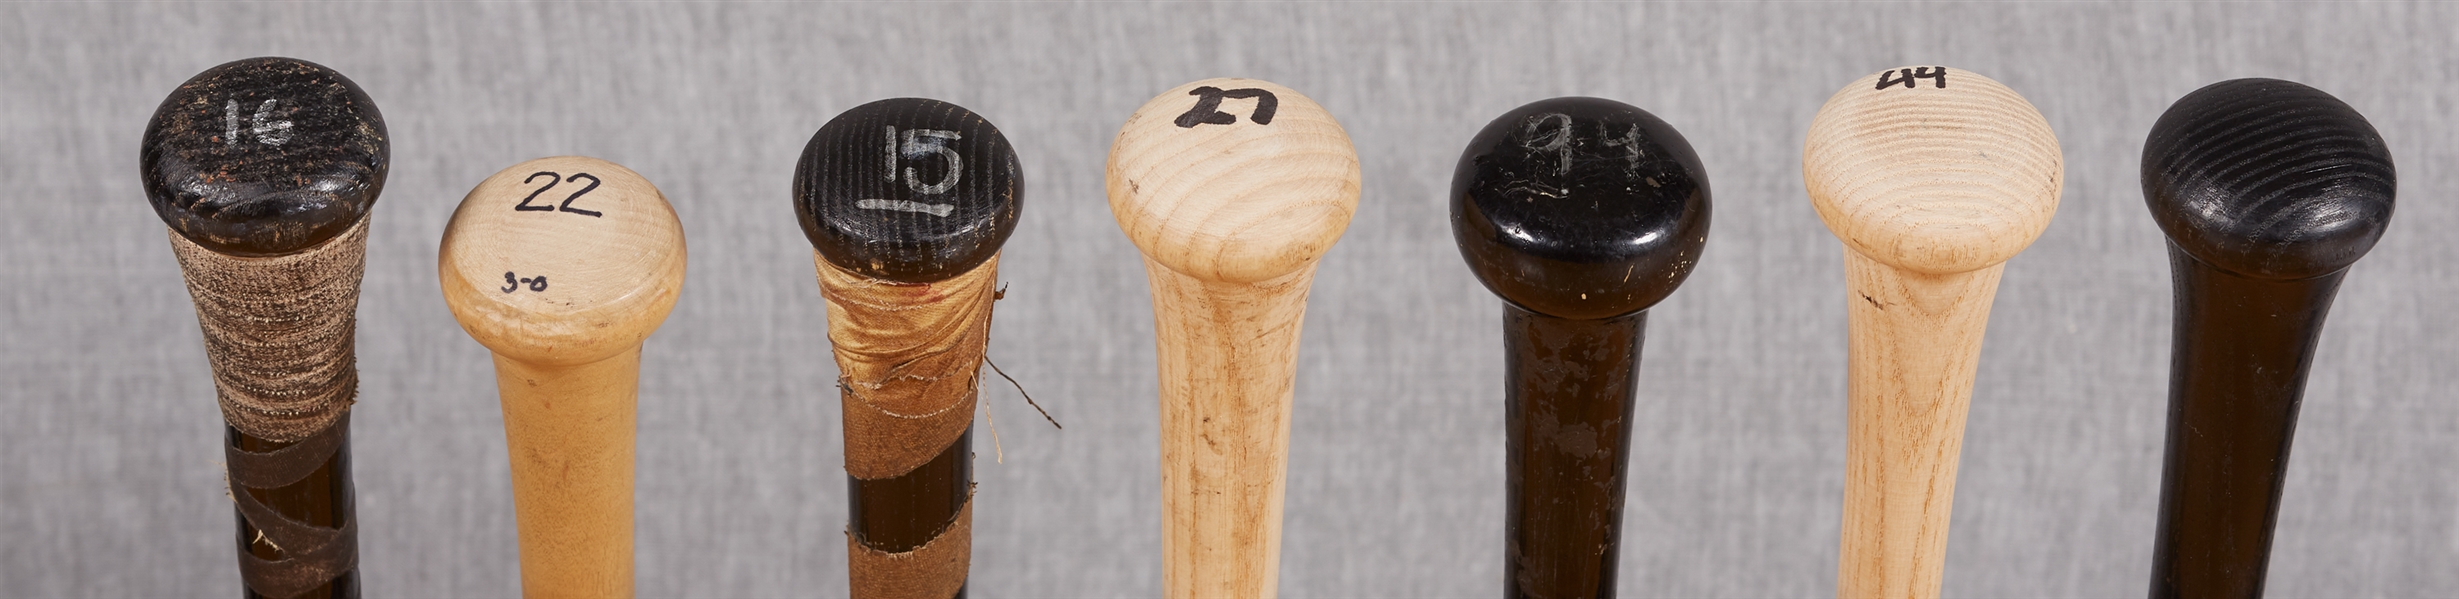 2006 St. Louis Cardinals World Champs Game-Used Bat Collection (7)